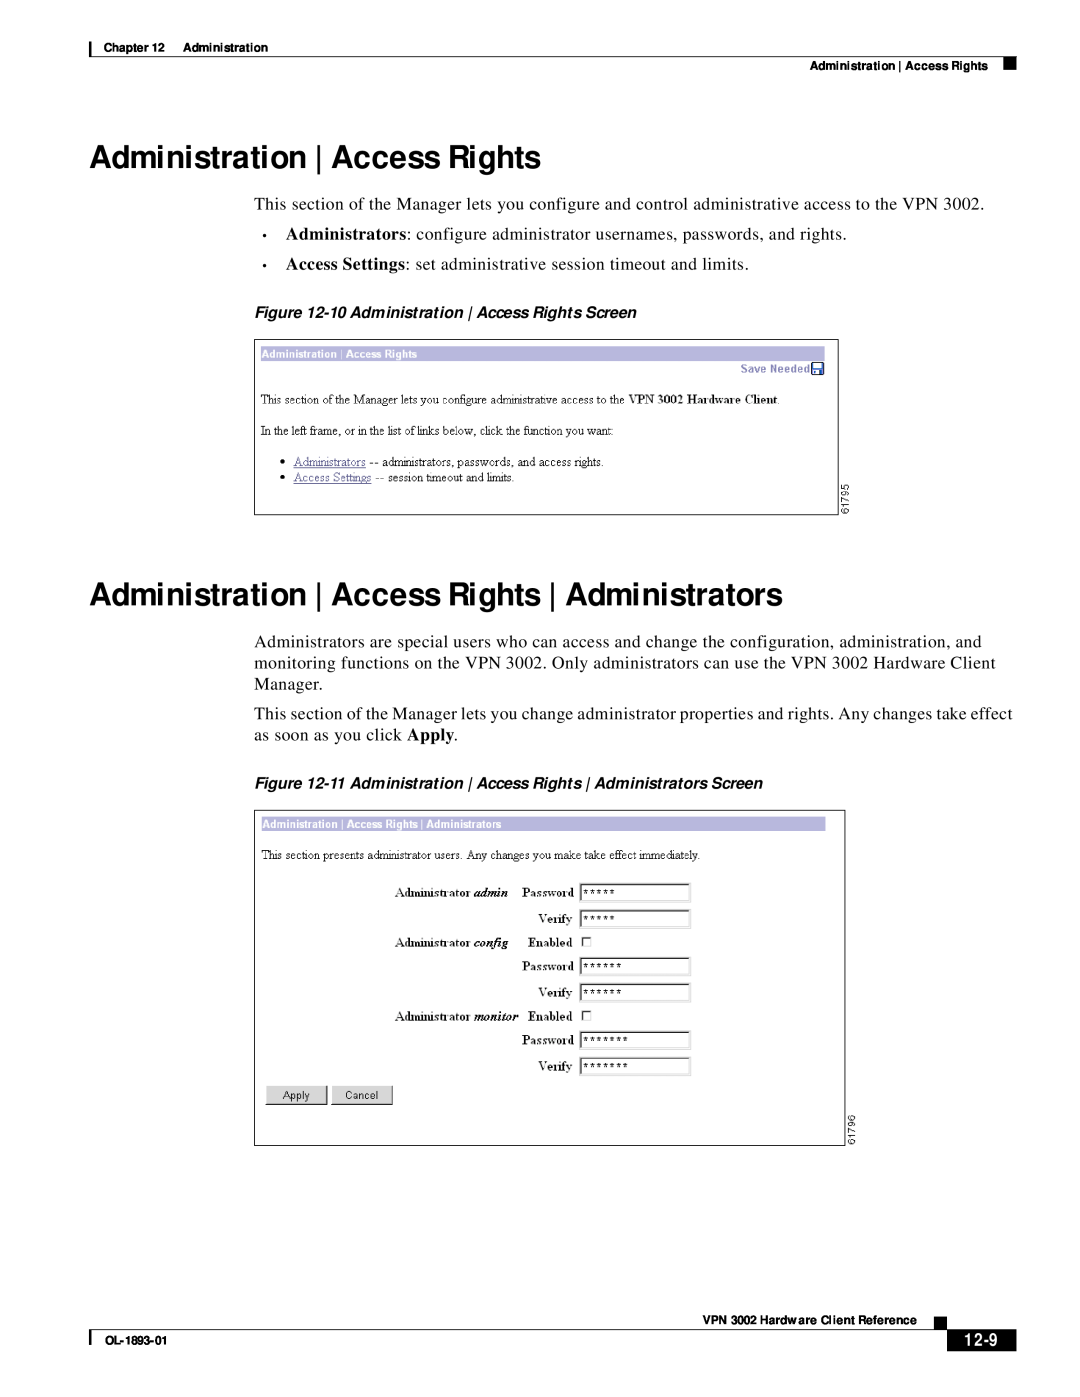 Cisco Systems VPN 3002 Administration | Access Rights | Administrators, 12-9, 10Administration | Access Rights Screen 